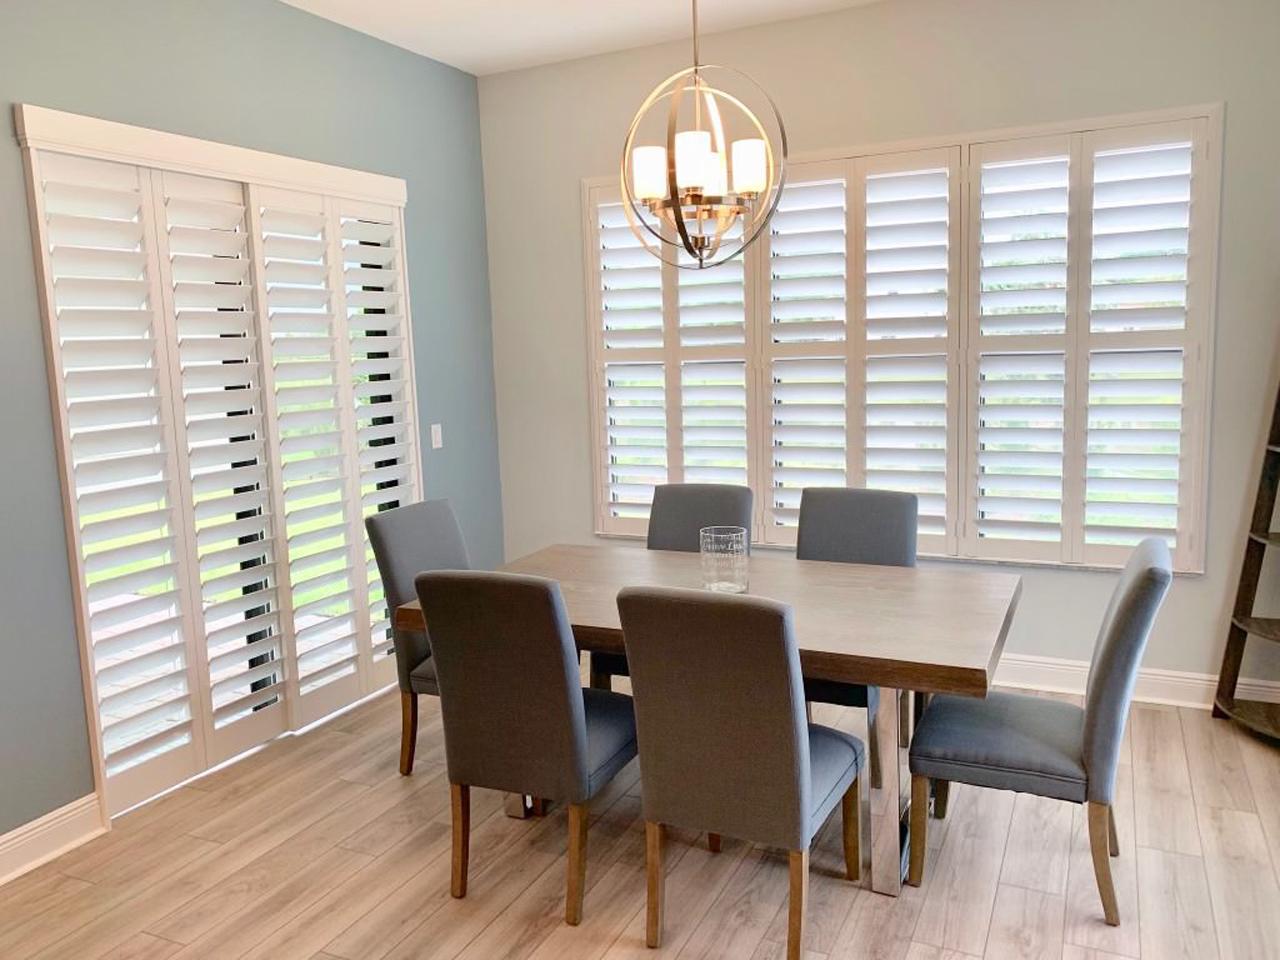 Dining room with plantation shutters on windows and French Door